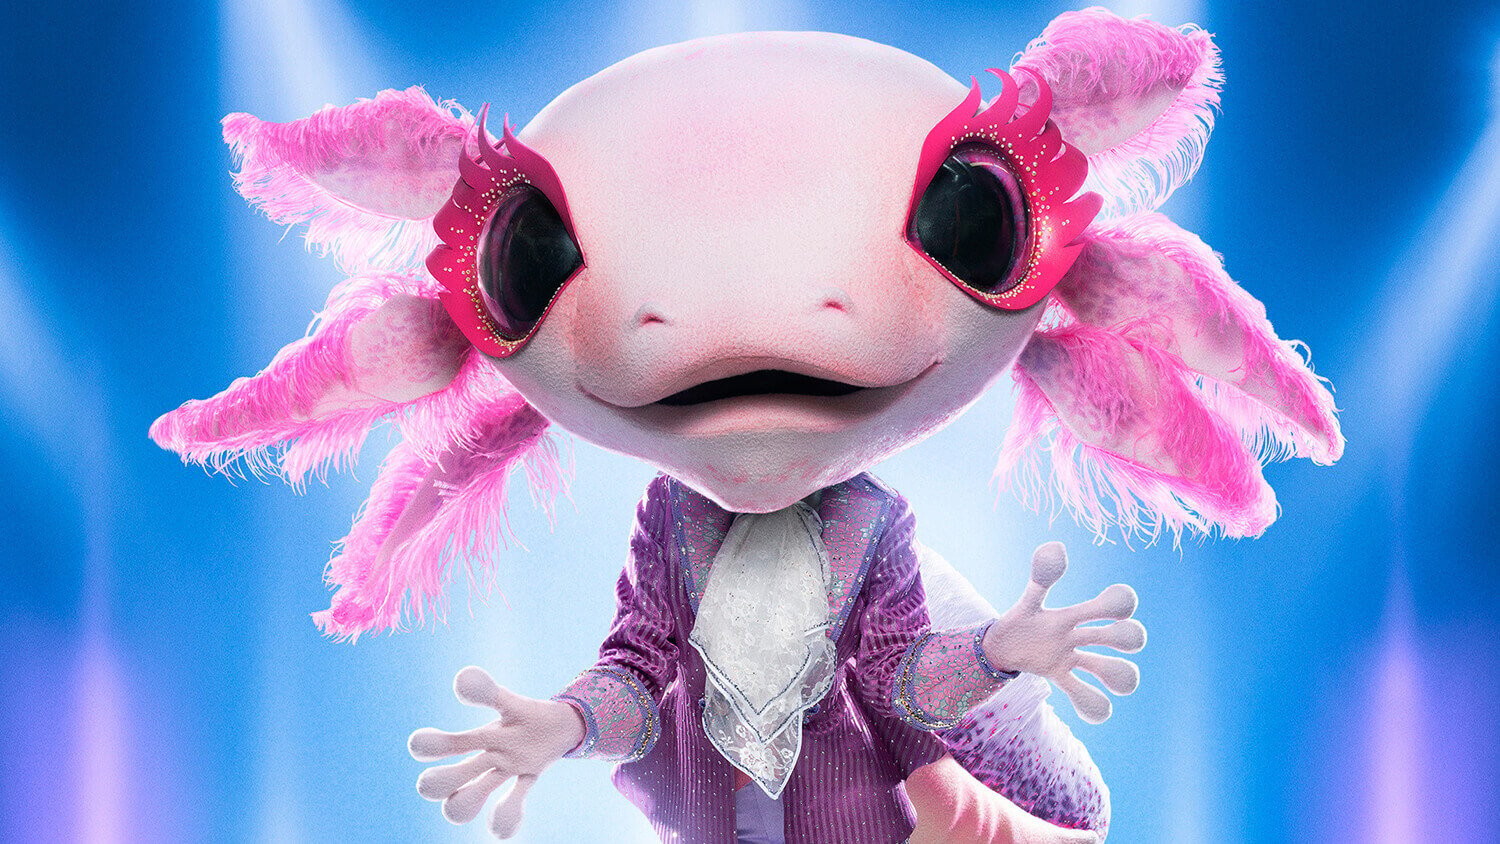 The Masked Singer Season 9 promo image shows Axolotl against a blue background